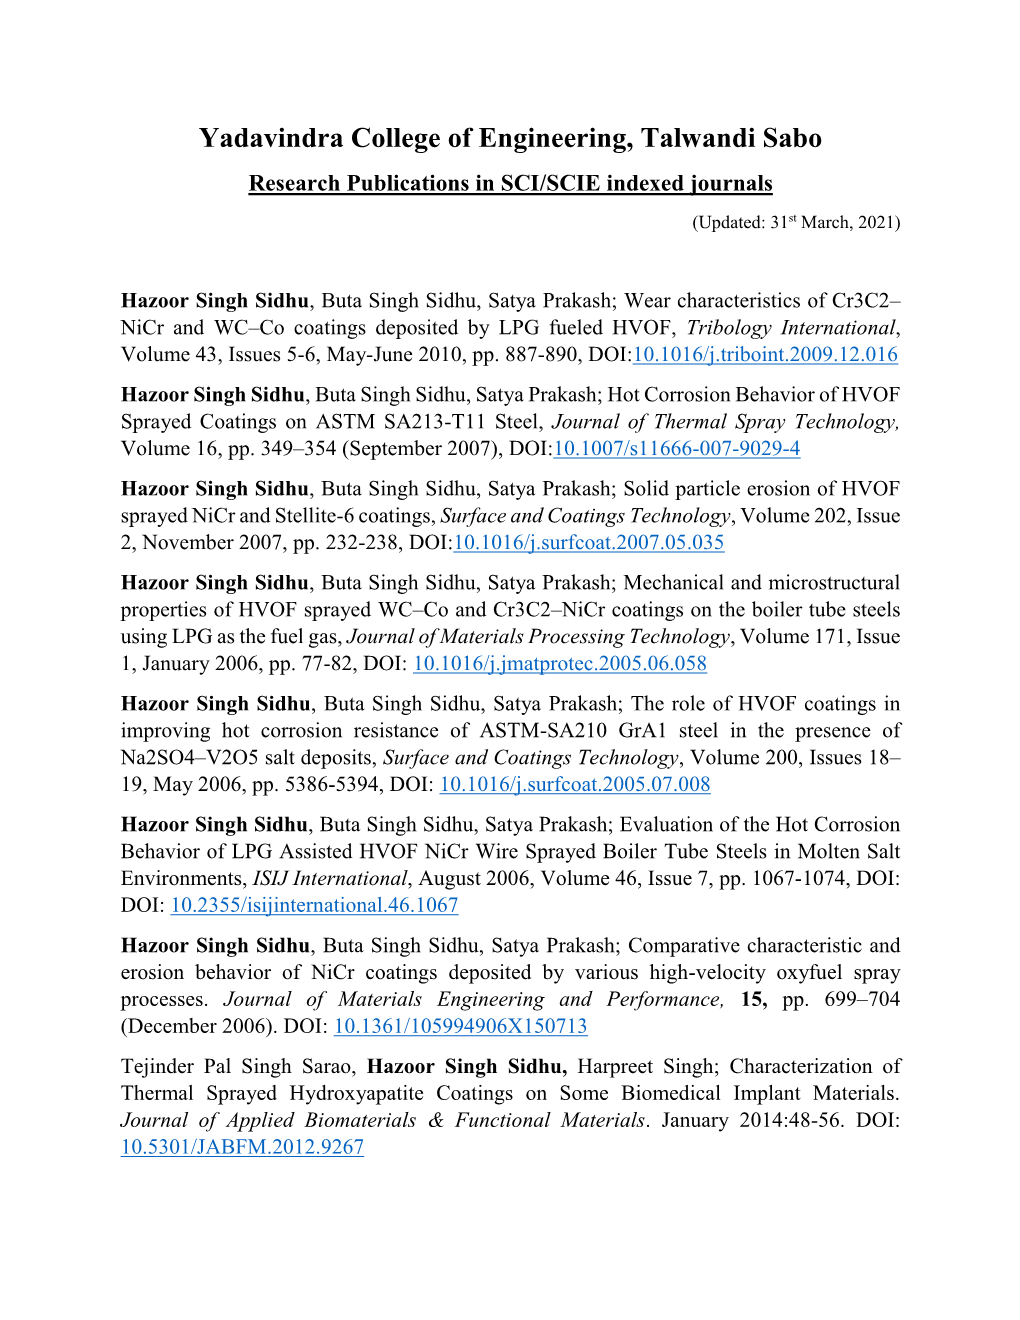 Yadavindra College of Engineering, Talwandi Sabo Research Publications in SCI/SCIE Indexed Journals (Updated: 31St March, 2021)